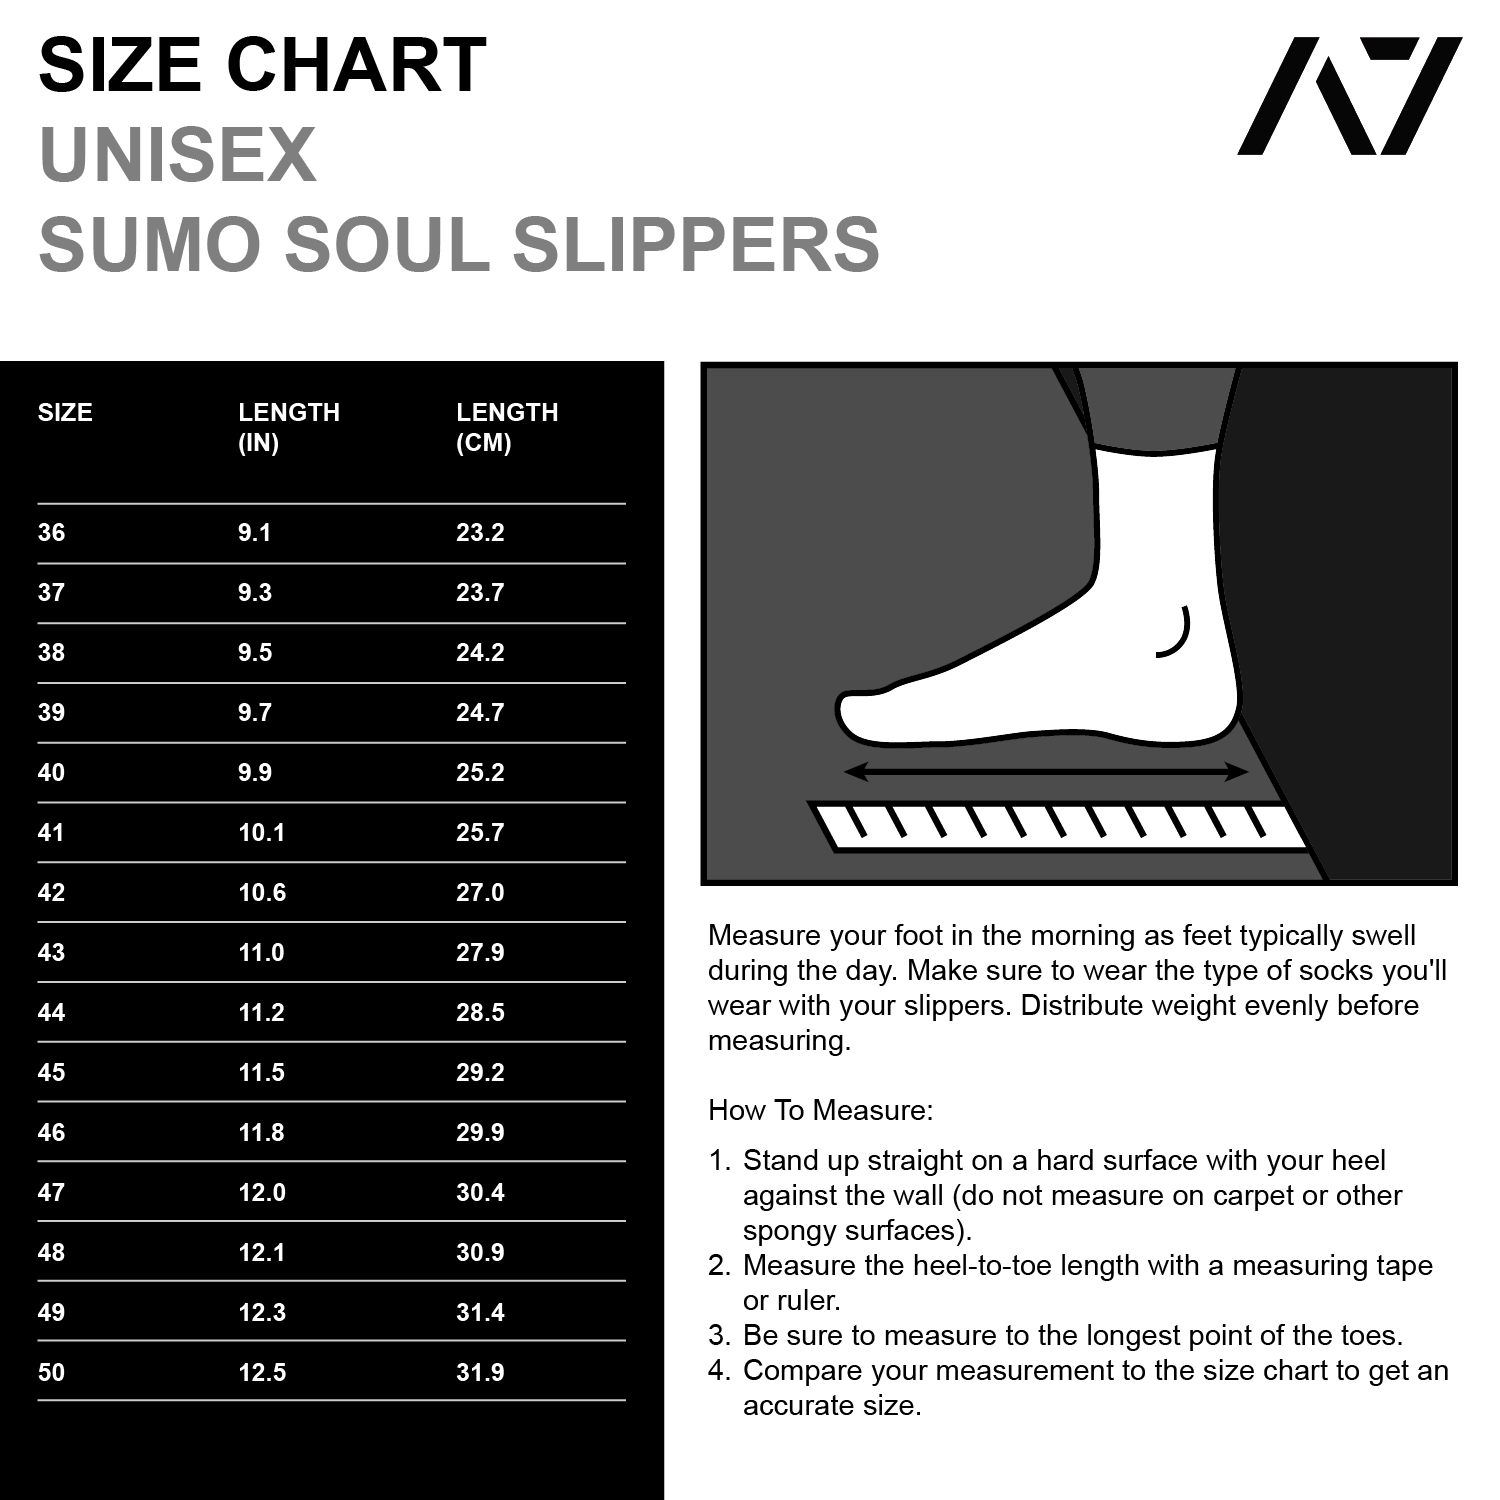 Simply designed with you in mind. With a 5 mm thin rubber grip sole, single pull diagonal/ Centre tension strap, all plastic components to allow easy washing, and even a convenient storage bag. These Soul Sumo v2 slippers are sure to impress. These slippers are ultra-compact and when rolled up are about the size of your wrist wraps. Our Soul Sumo Slippers are approved for IPF competitions and make a great addition to any IPF approved kit! A7 Europe shipping to France, Italy, Germany, Sweden and Poland.